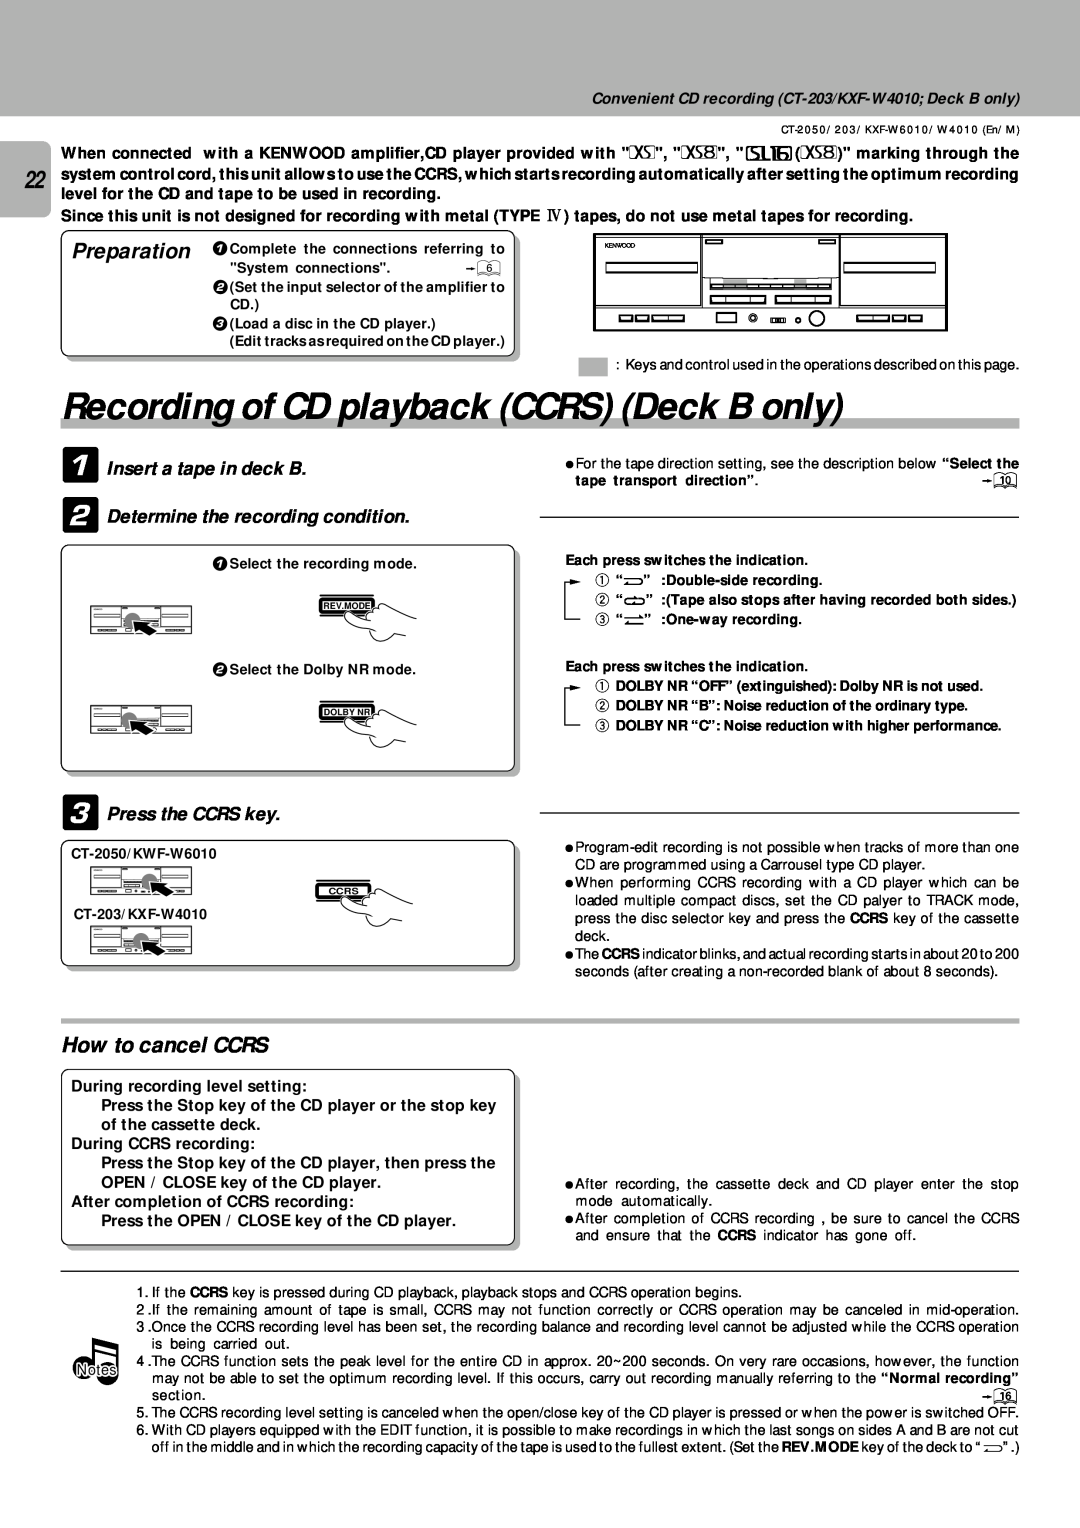 Kenwood CT/KXF-W instruction manual Recording of CD playback CCRS Deck B only, How to cancel CCRS, Press the CCRS key 